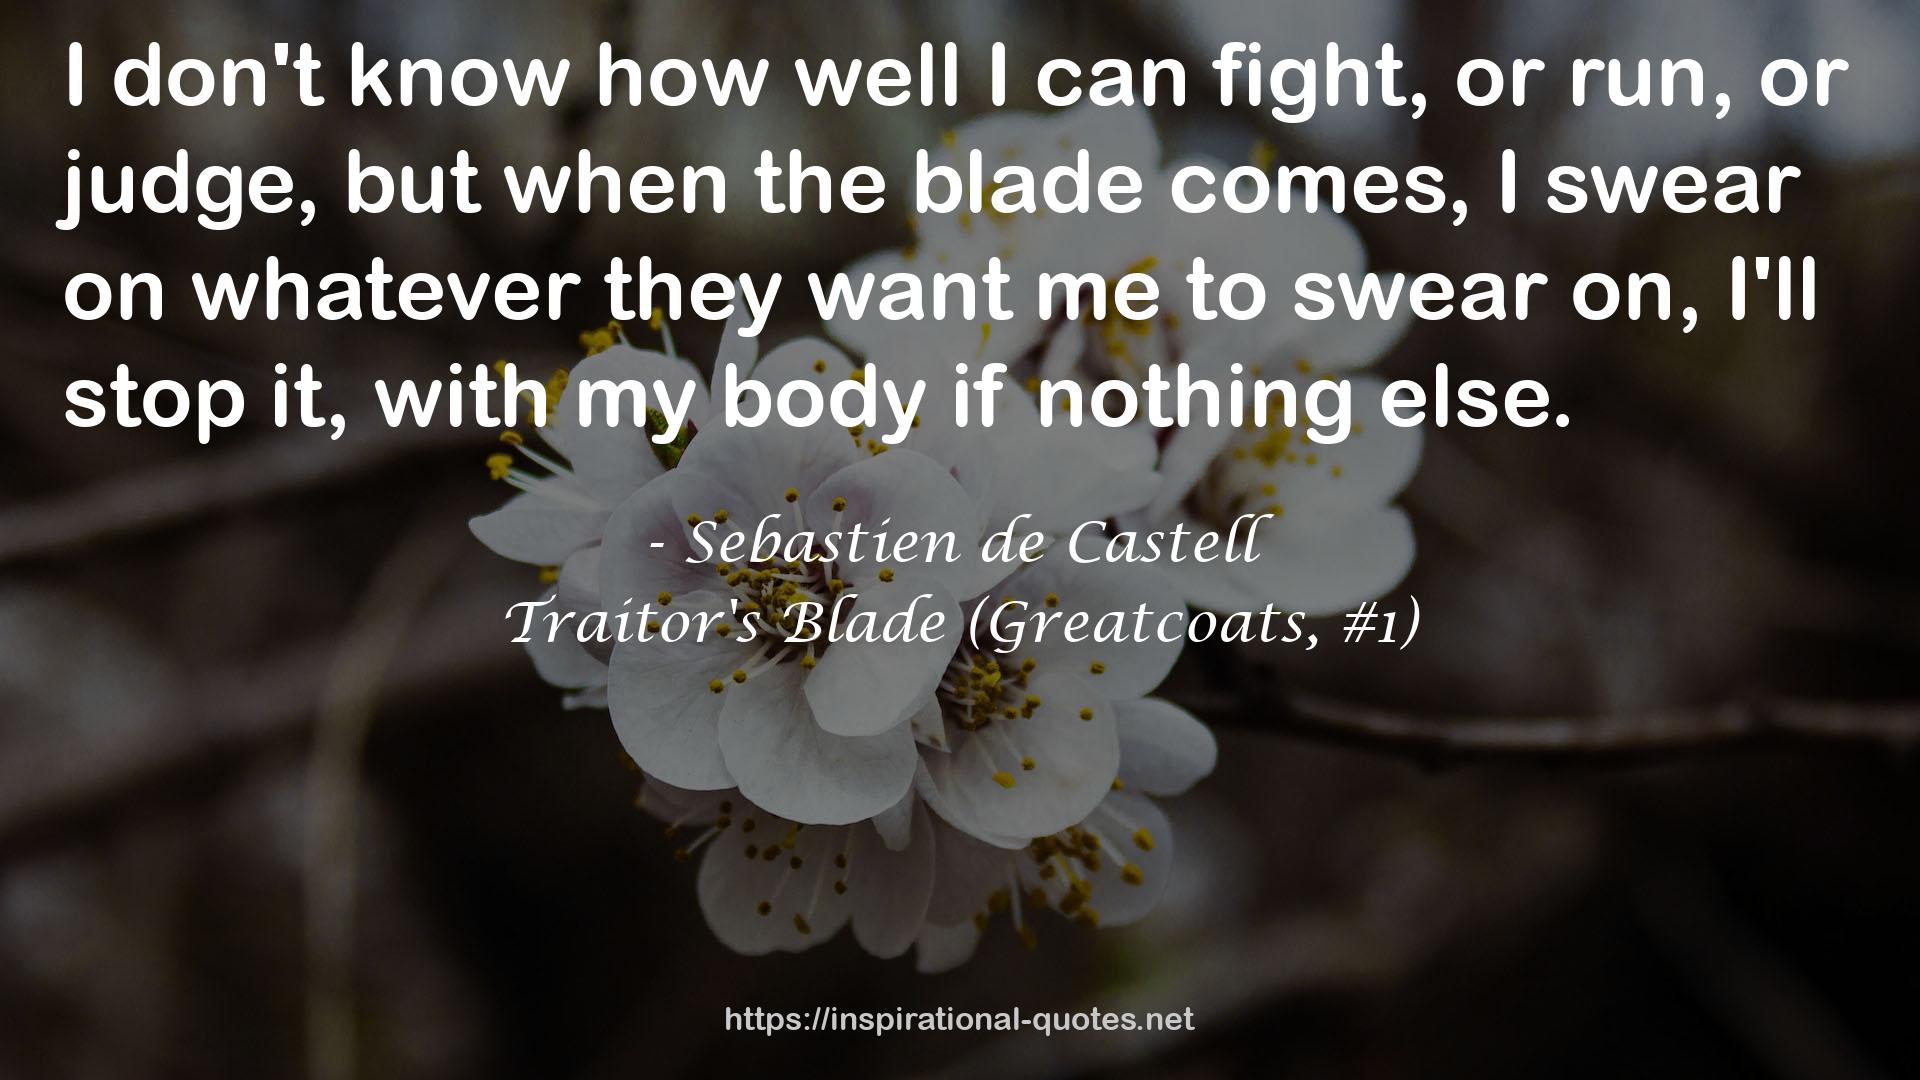 Traitor's Blade (Greatcoats, #1) QUOTES